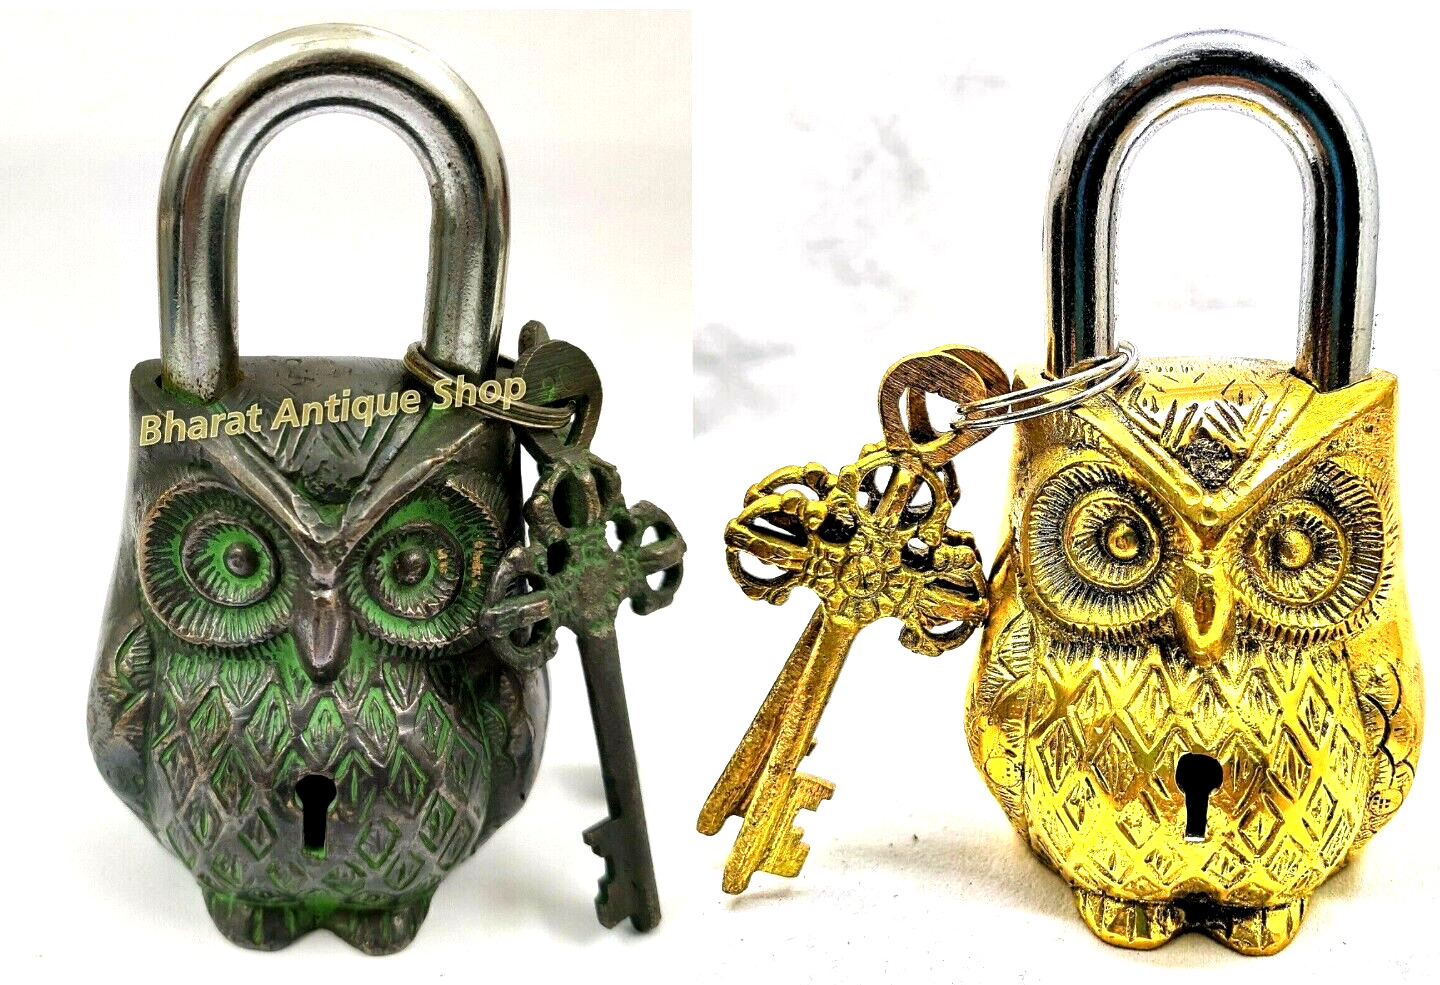 Set of 2 Antique Brass Owl Vintage Padlock with Working Key Rare Old Style lock